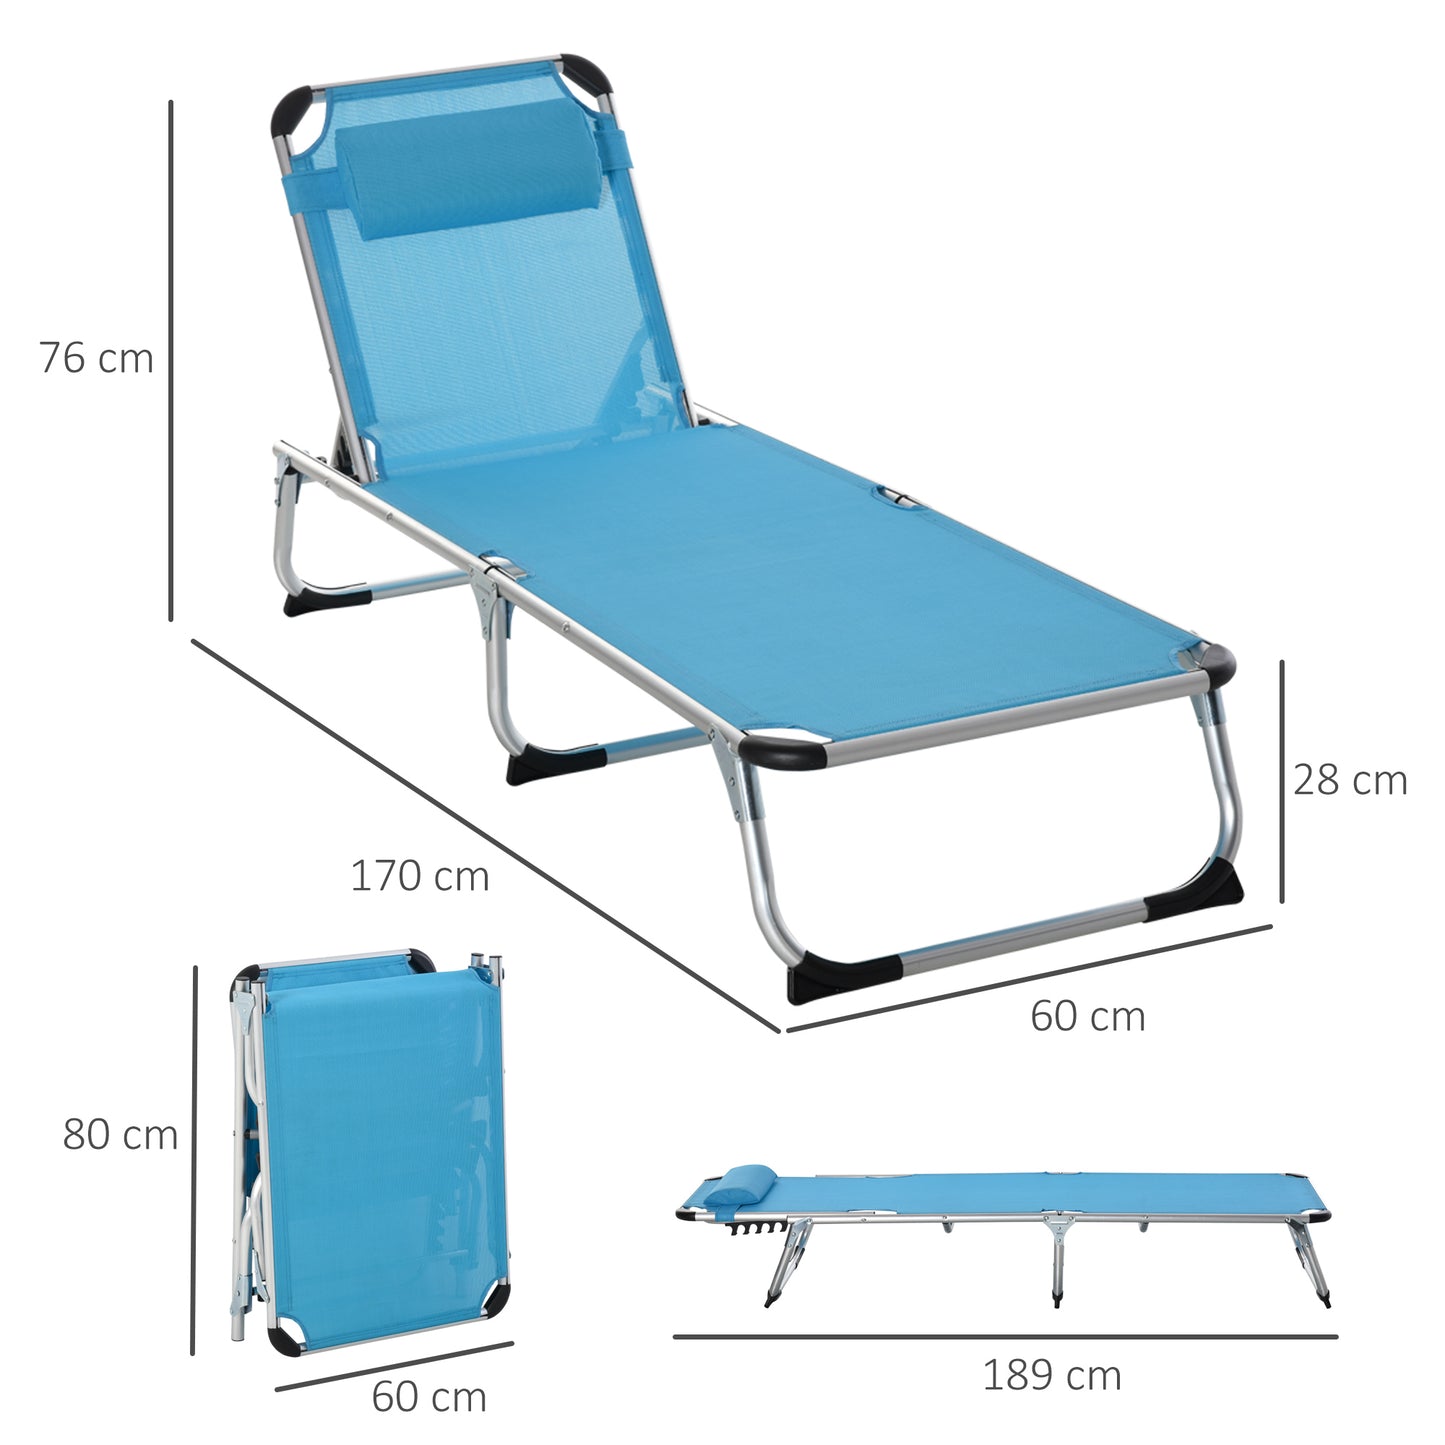 Outsunny Foldable Sun Lounger with Pillow, 5-Level Adjustable Reclining Lounge Chair, Aluminium Frame, Blue